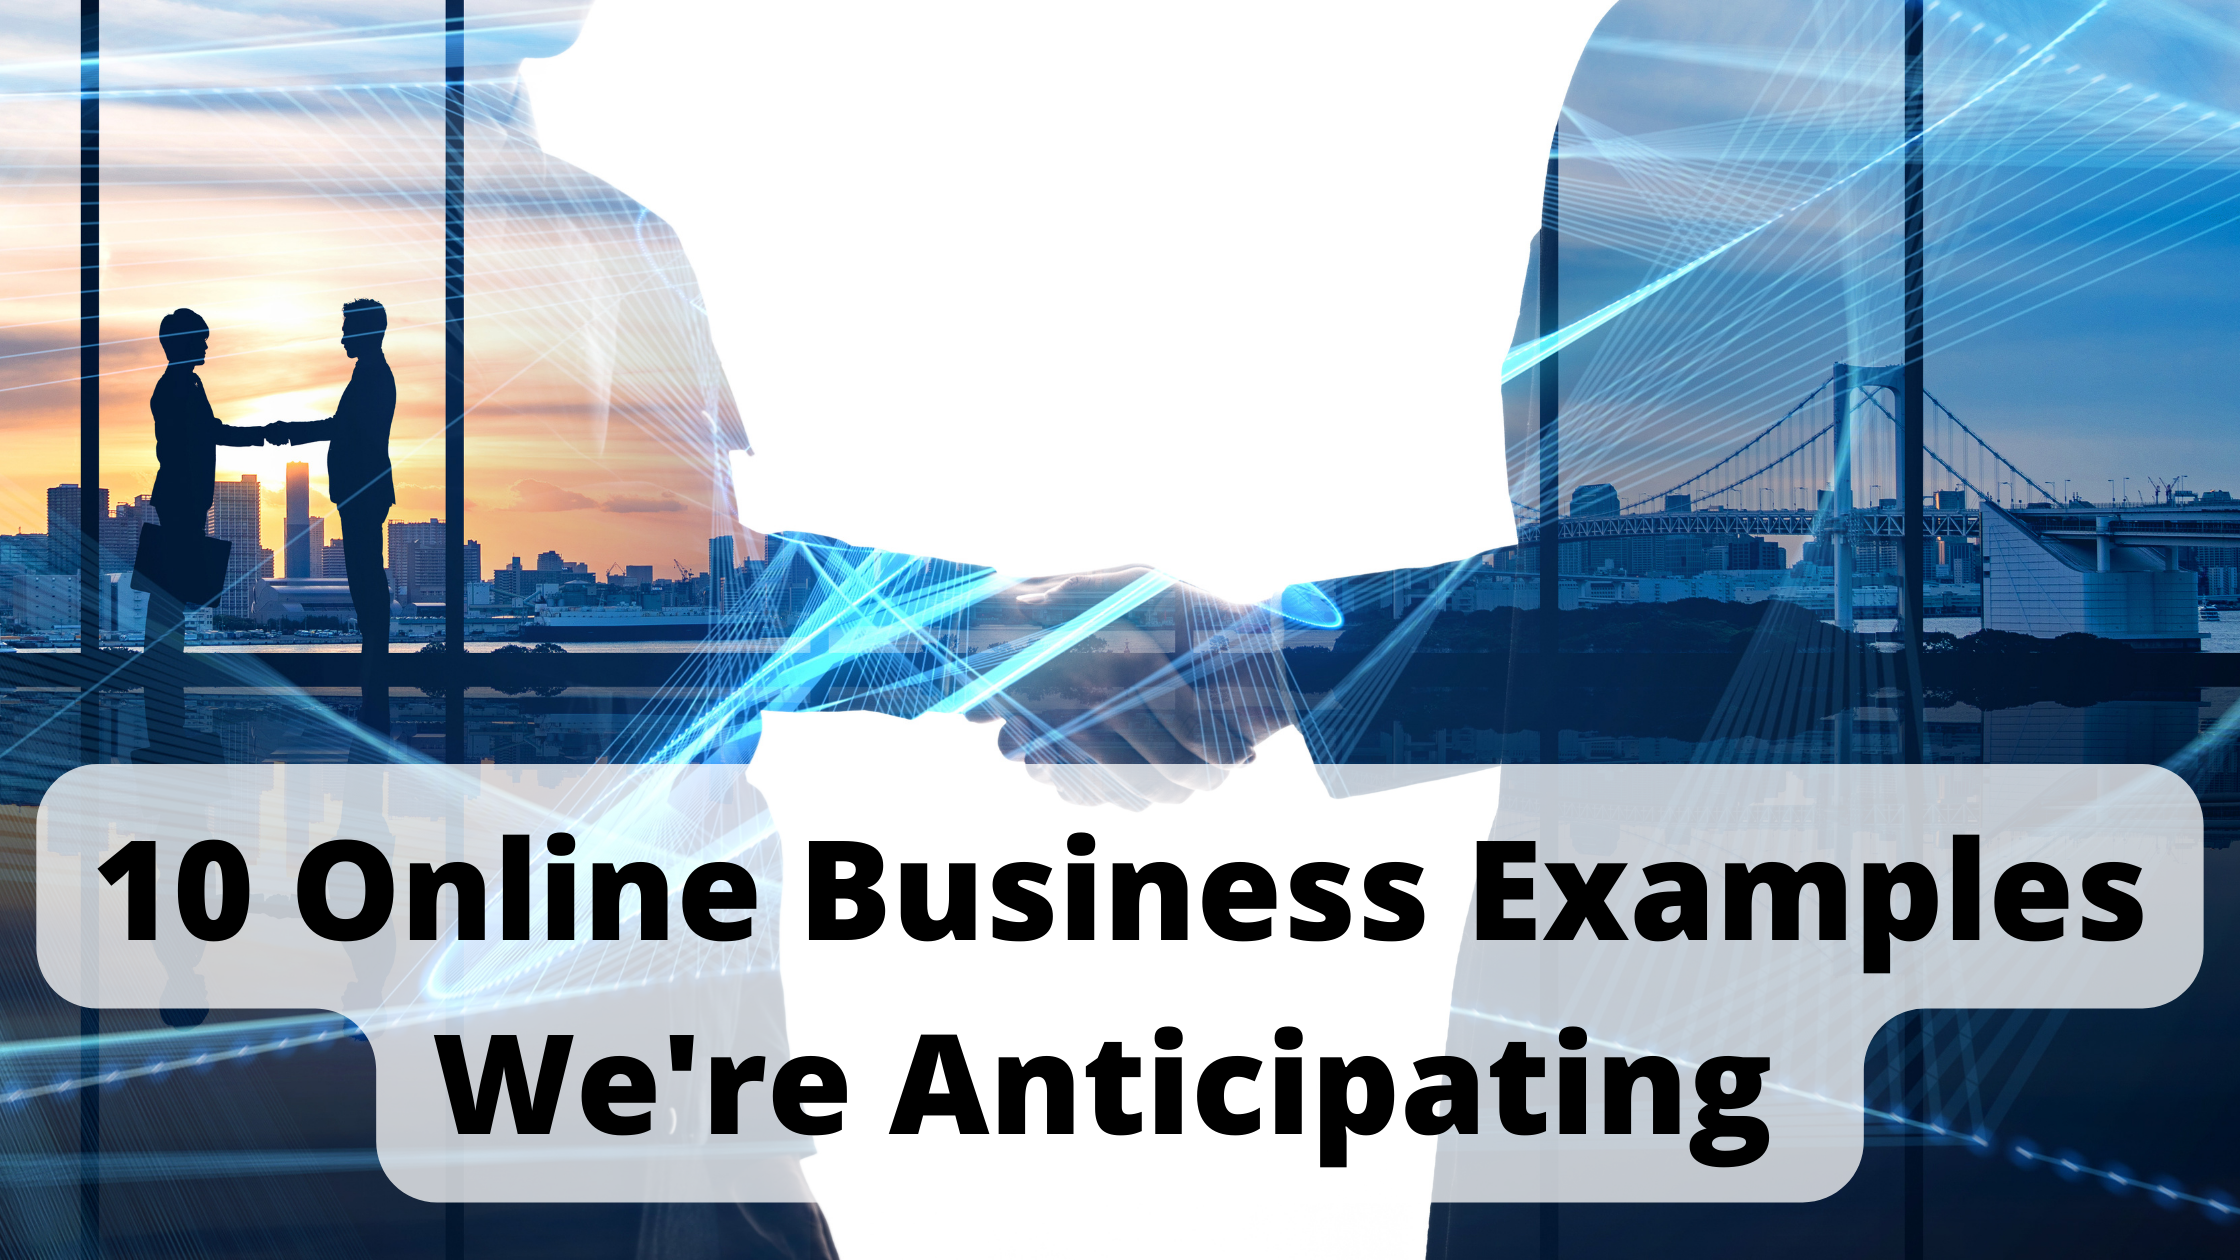 10 Online Business Examples We’re Anticipating